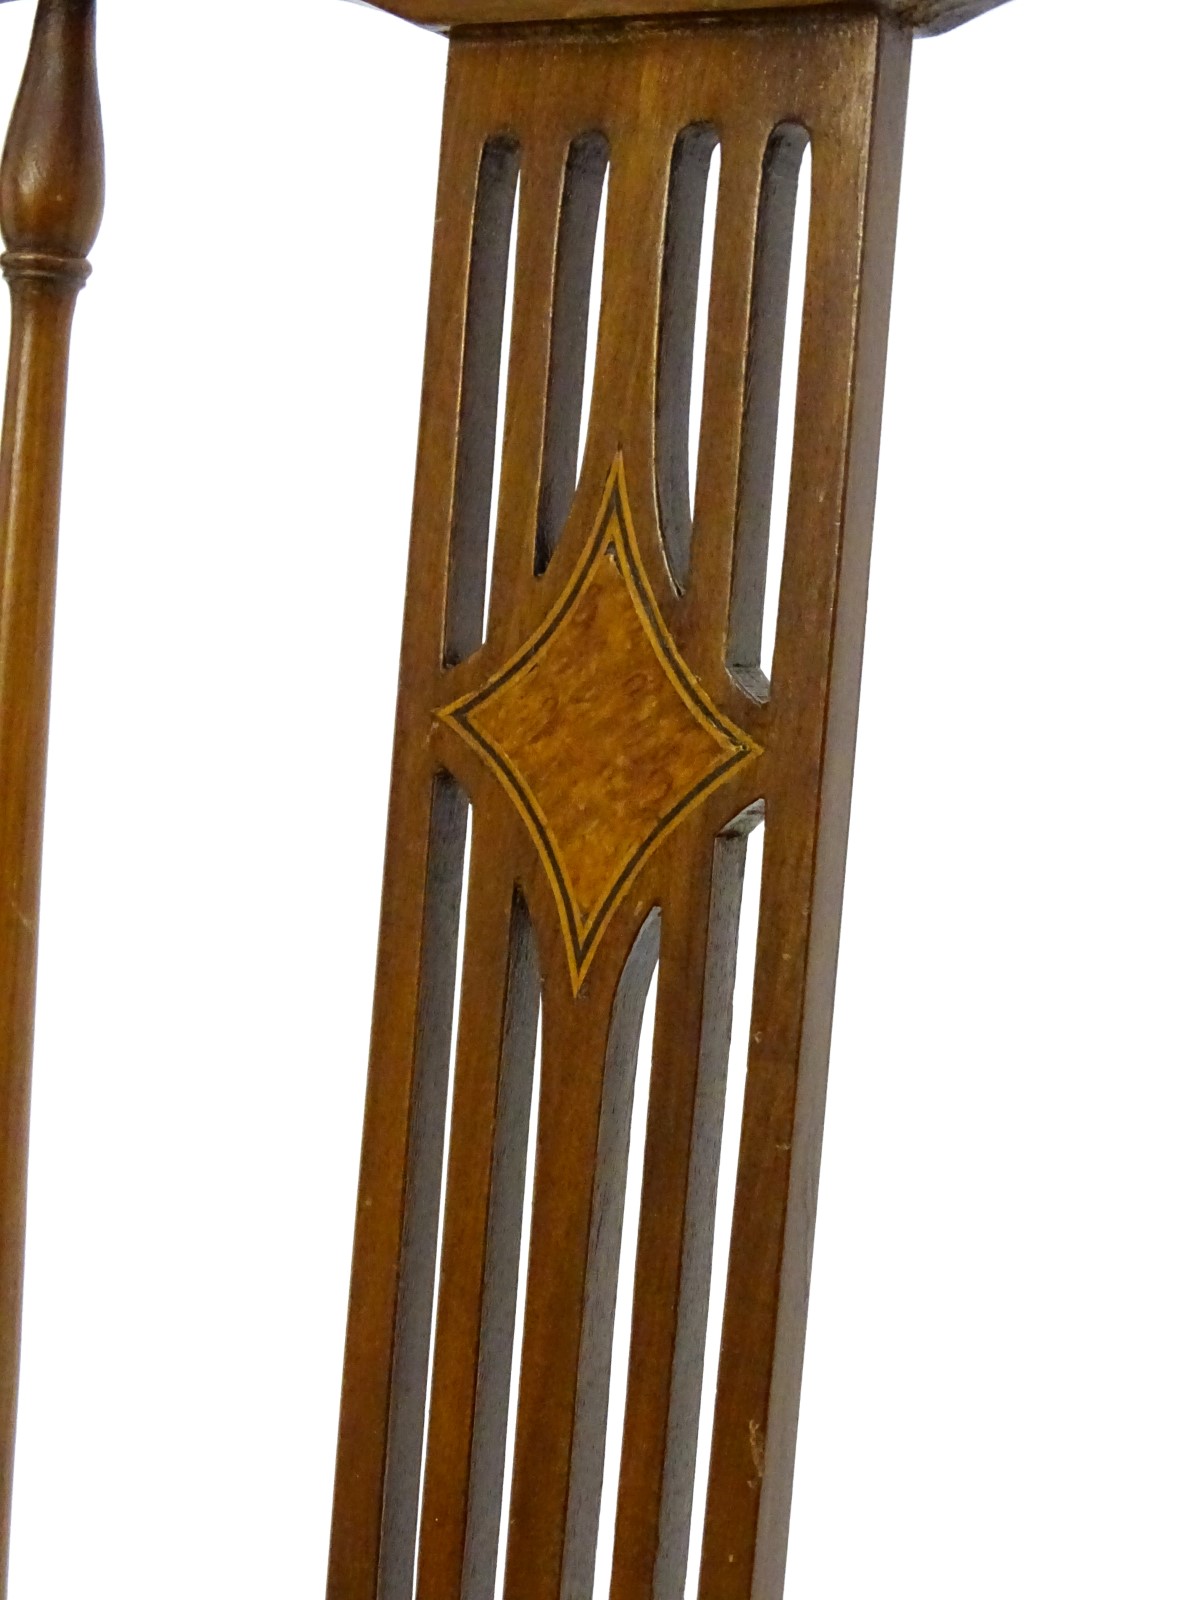 An early 20thC mahogany bedroom chair with a slatted backrest and inlaid decoration, - Image 6 of 9